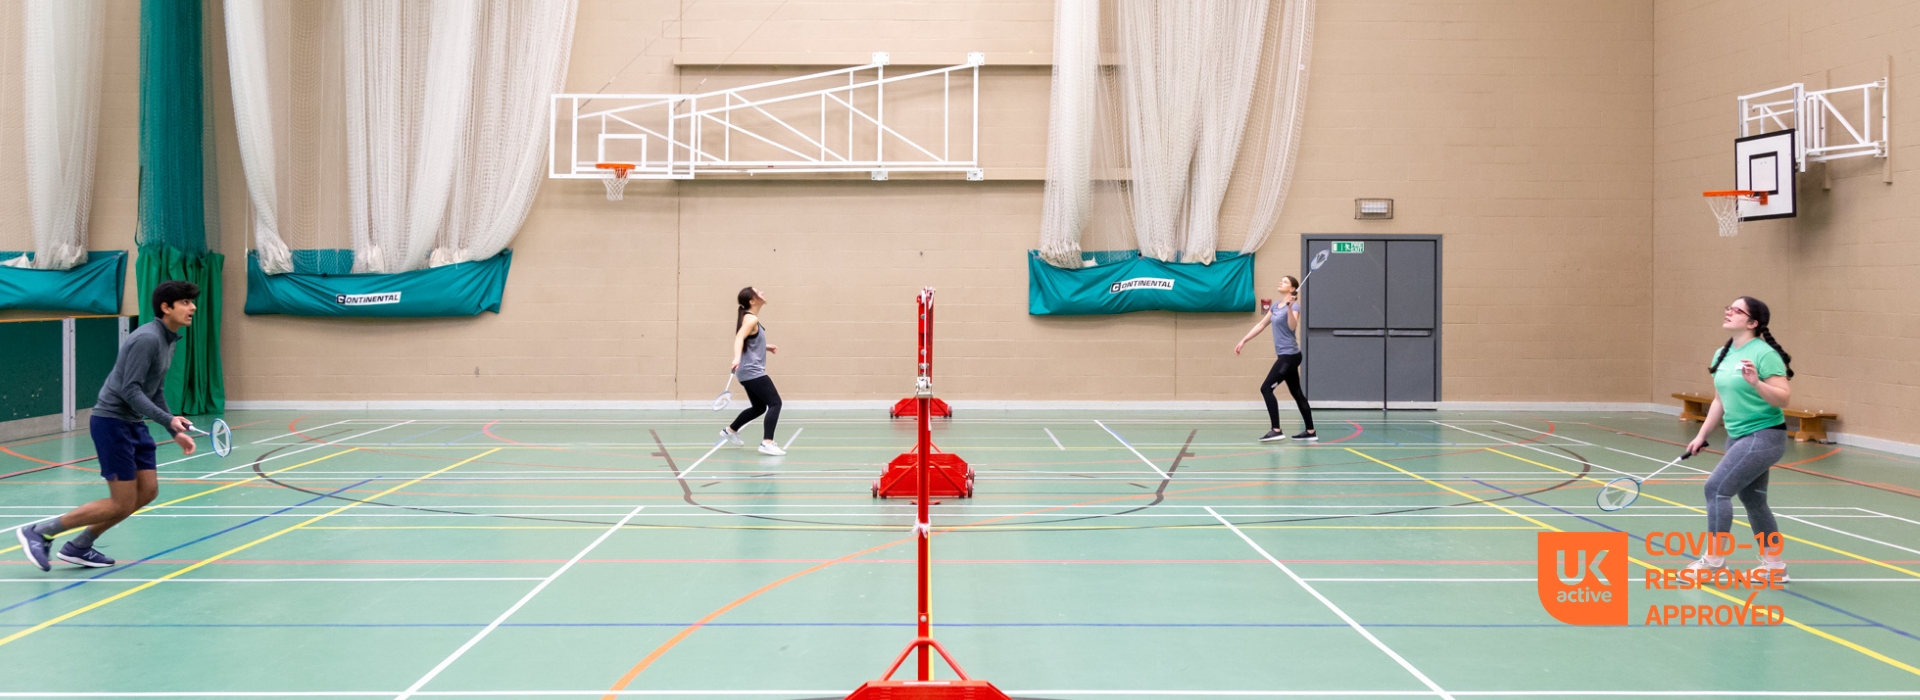 badminton in sports hall